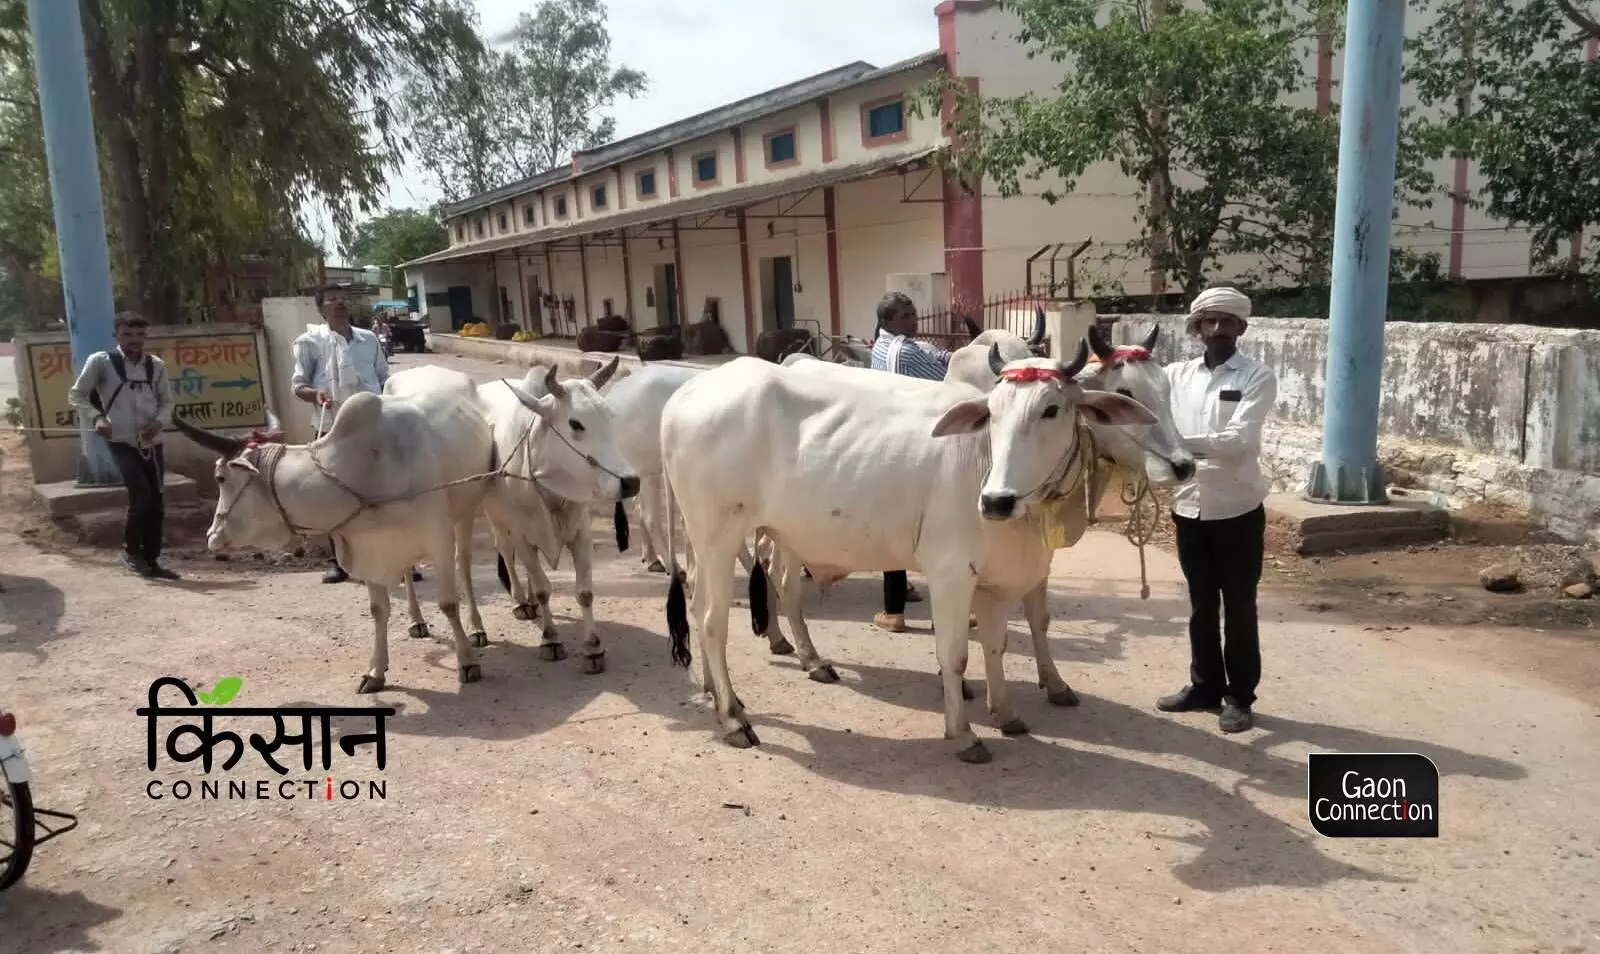 The indigenous Kenkatha breed of cattle is fast disappearing. Here’s why we should be worried.